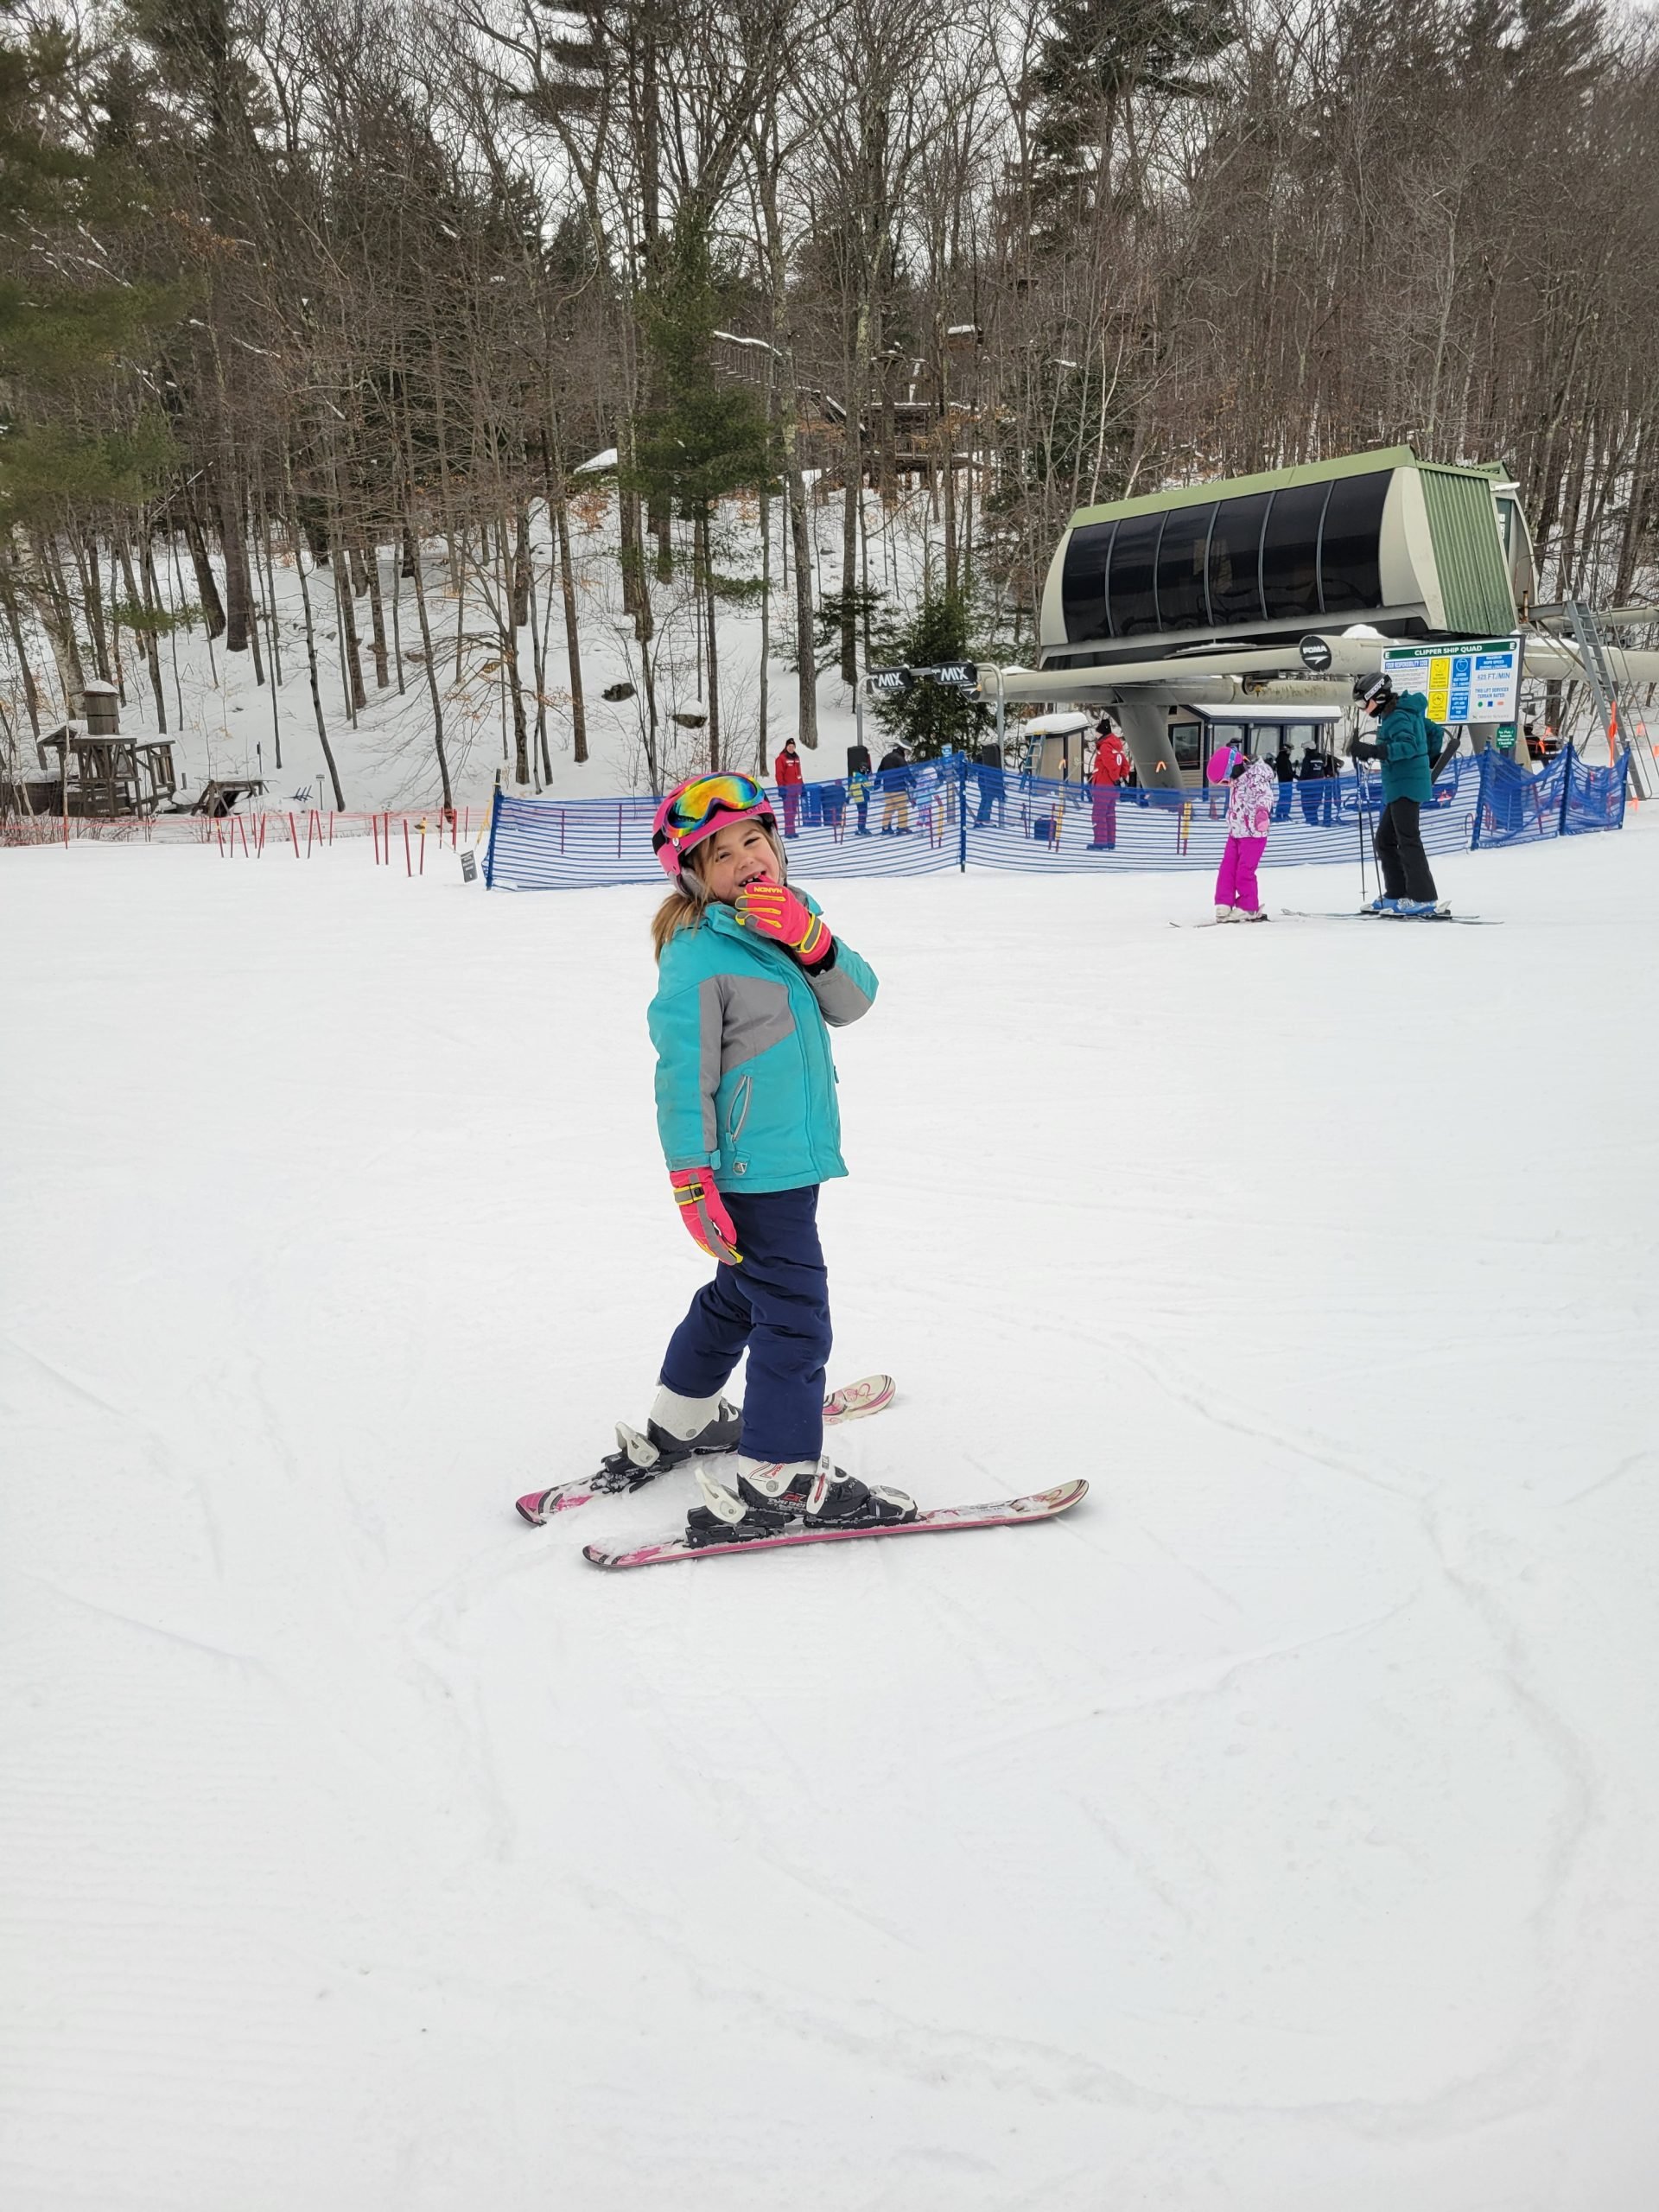 Learning how to ski